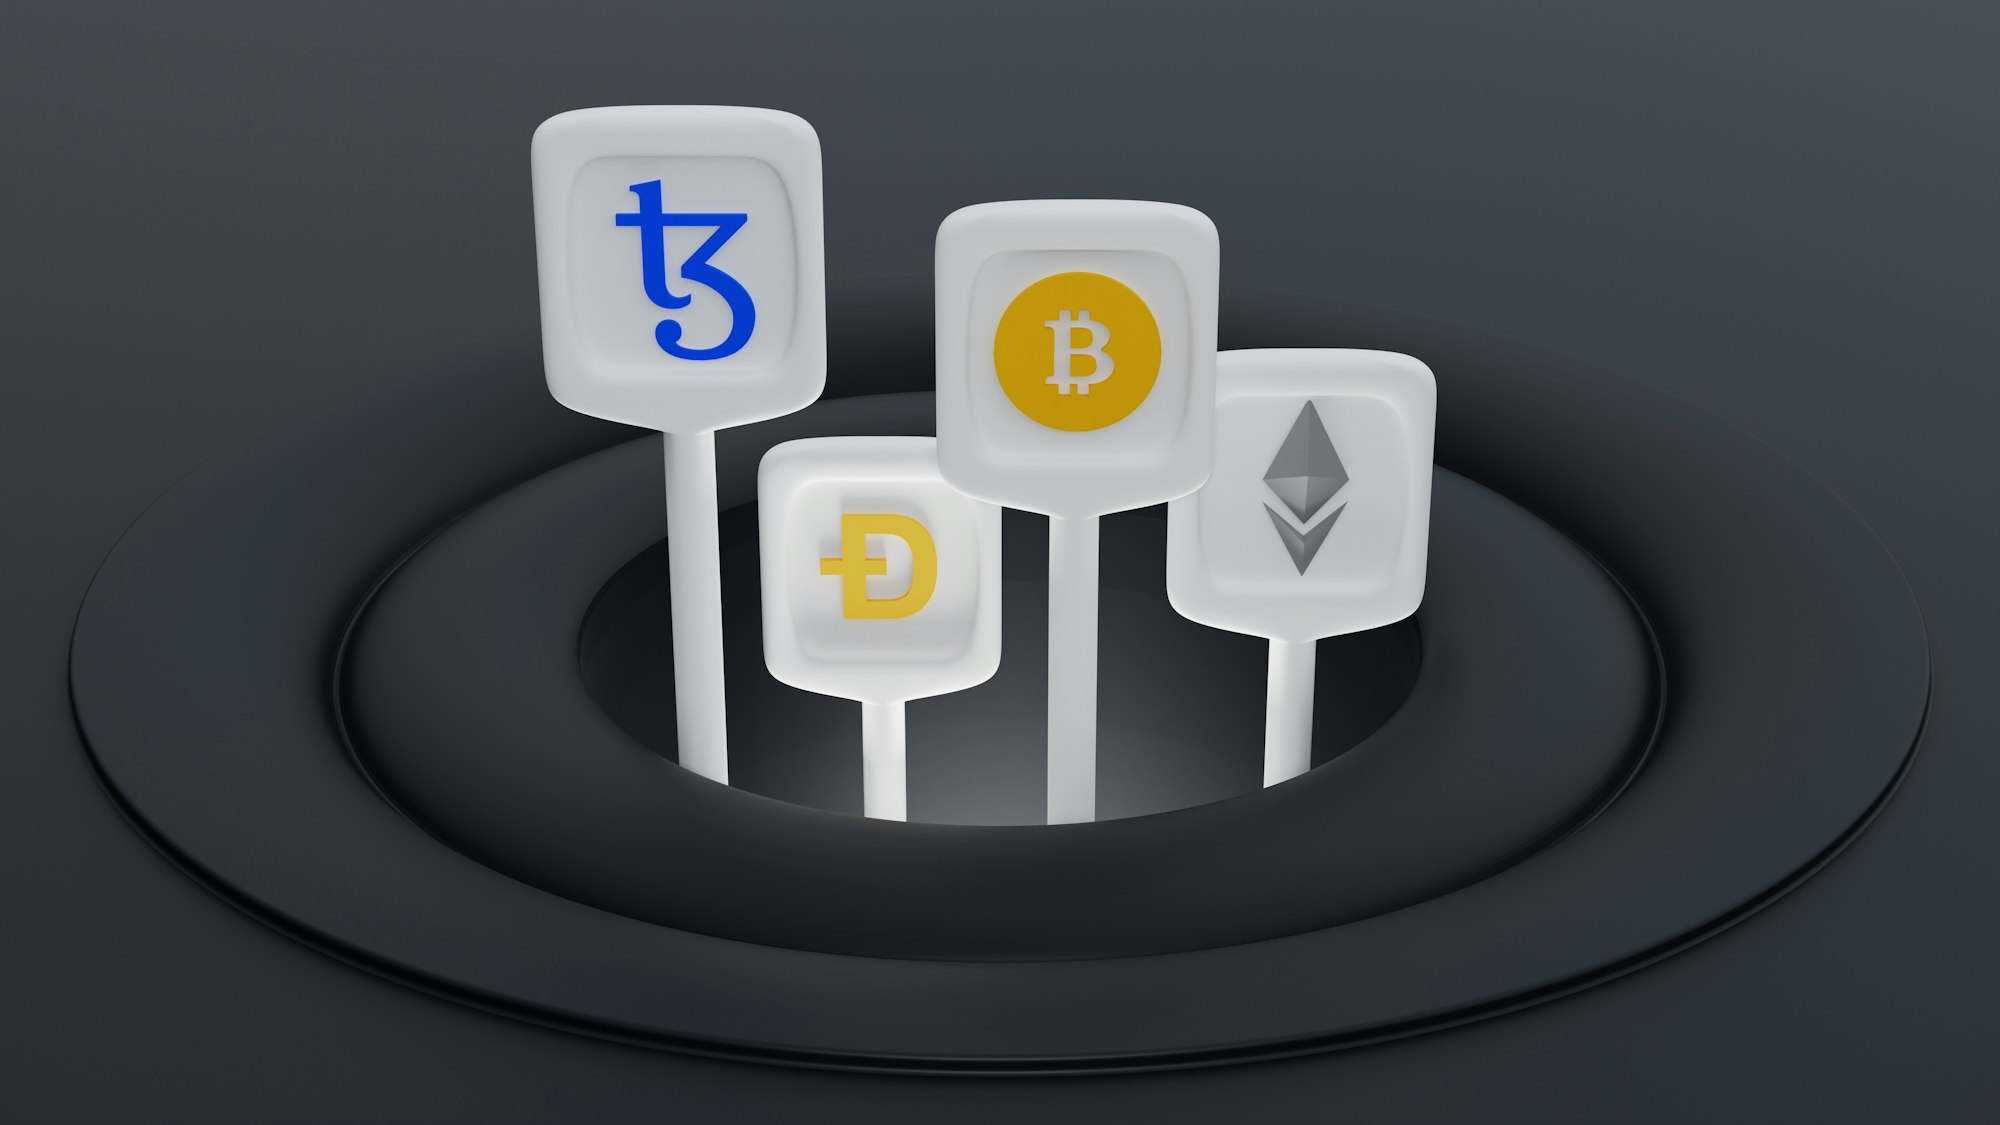 3D illustration of Tezos coin, bitcoin, Ehtereum, and dogecoin. Tezos is a blockchain designed to evolve.
work 👇: 
 Email: shubhamdhage000@gmail.com